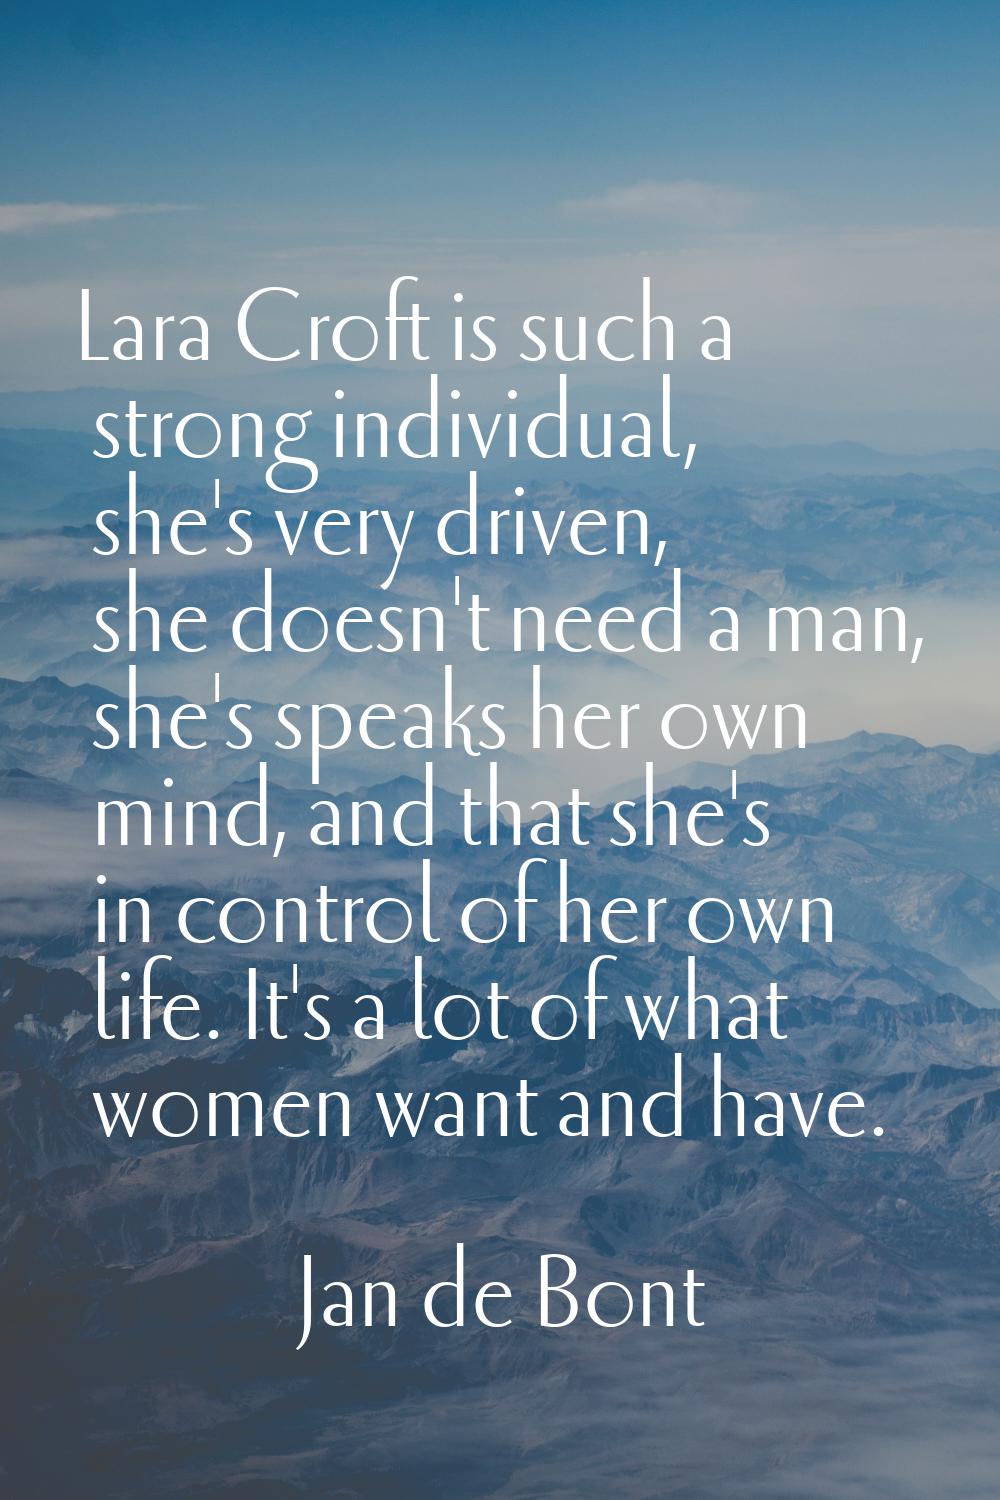 Lara Croft is such a strong individual, she's very driven, she doesn't need a man, she's speaks her